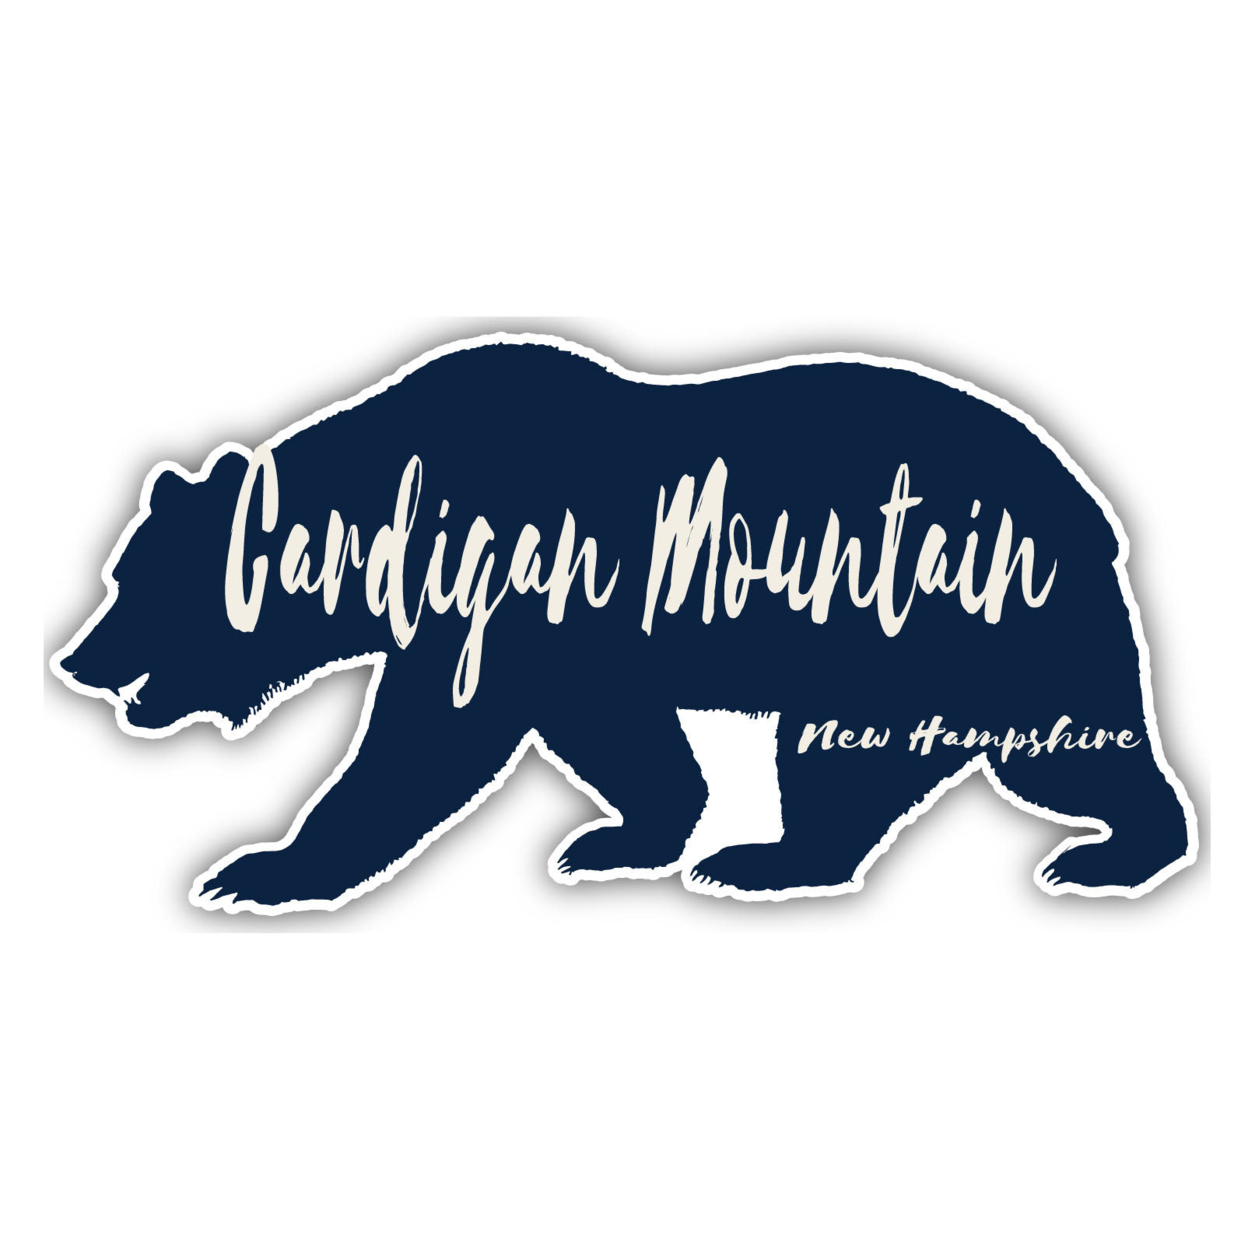 Cardigan Mountain New Hampshire Souvenir Decorative Stickers (Choose Theme And Size) - 4-Pack, 12-Inch, Bear